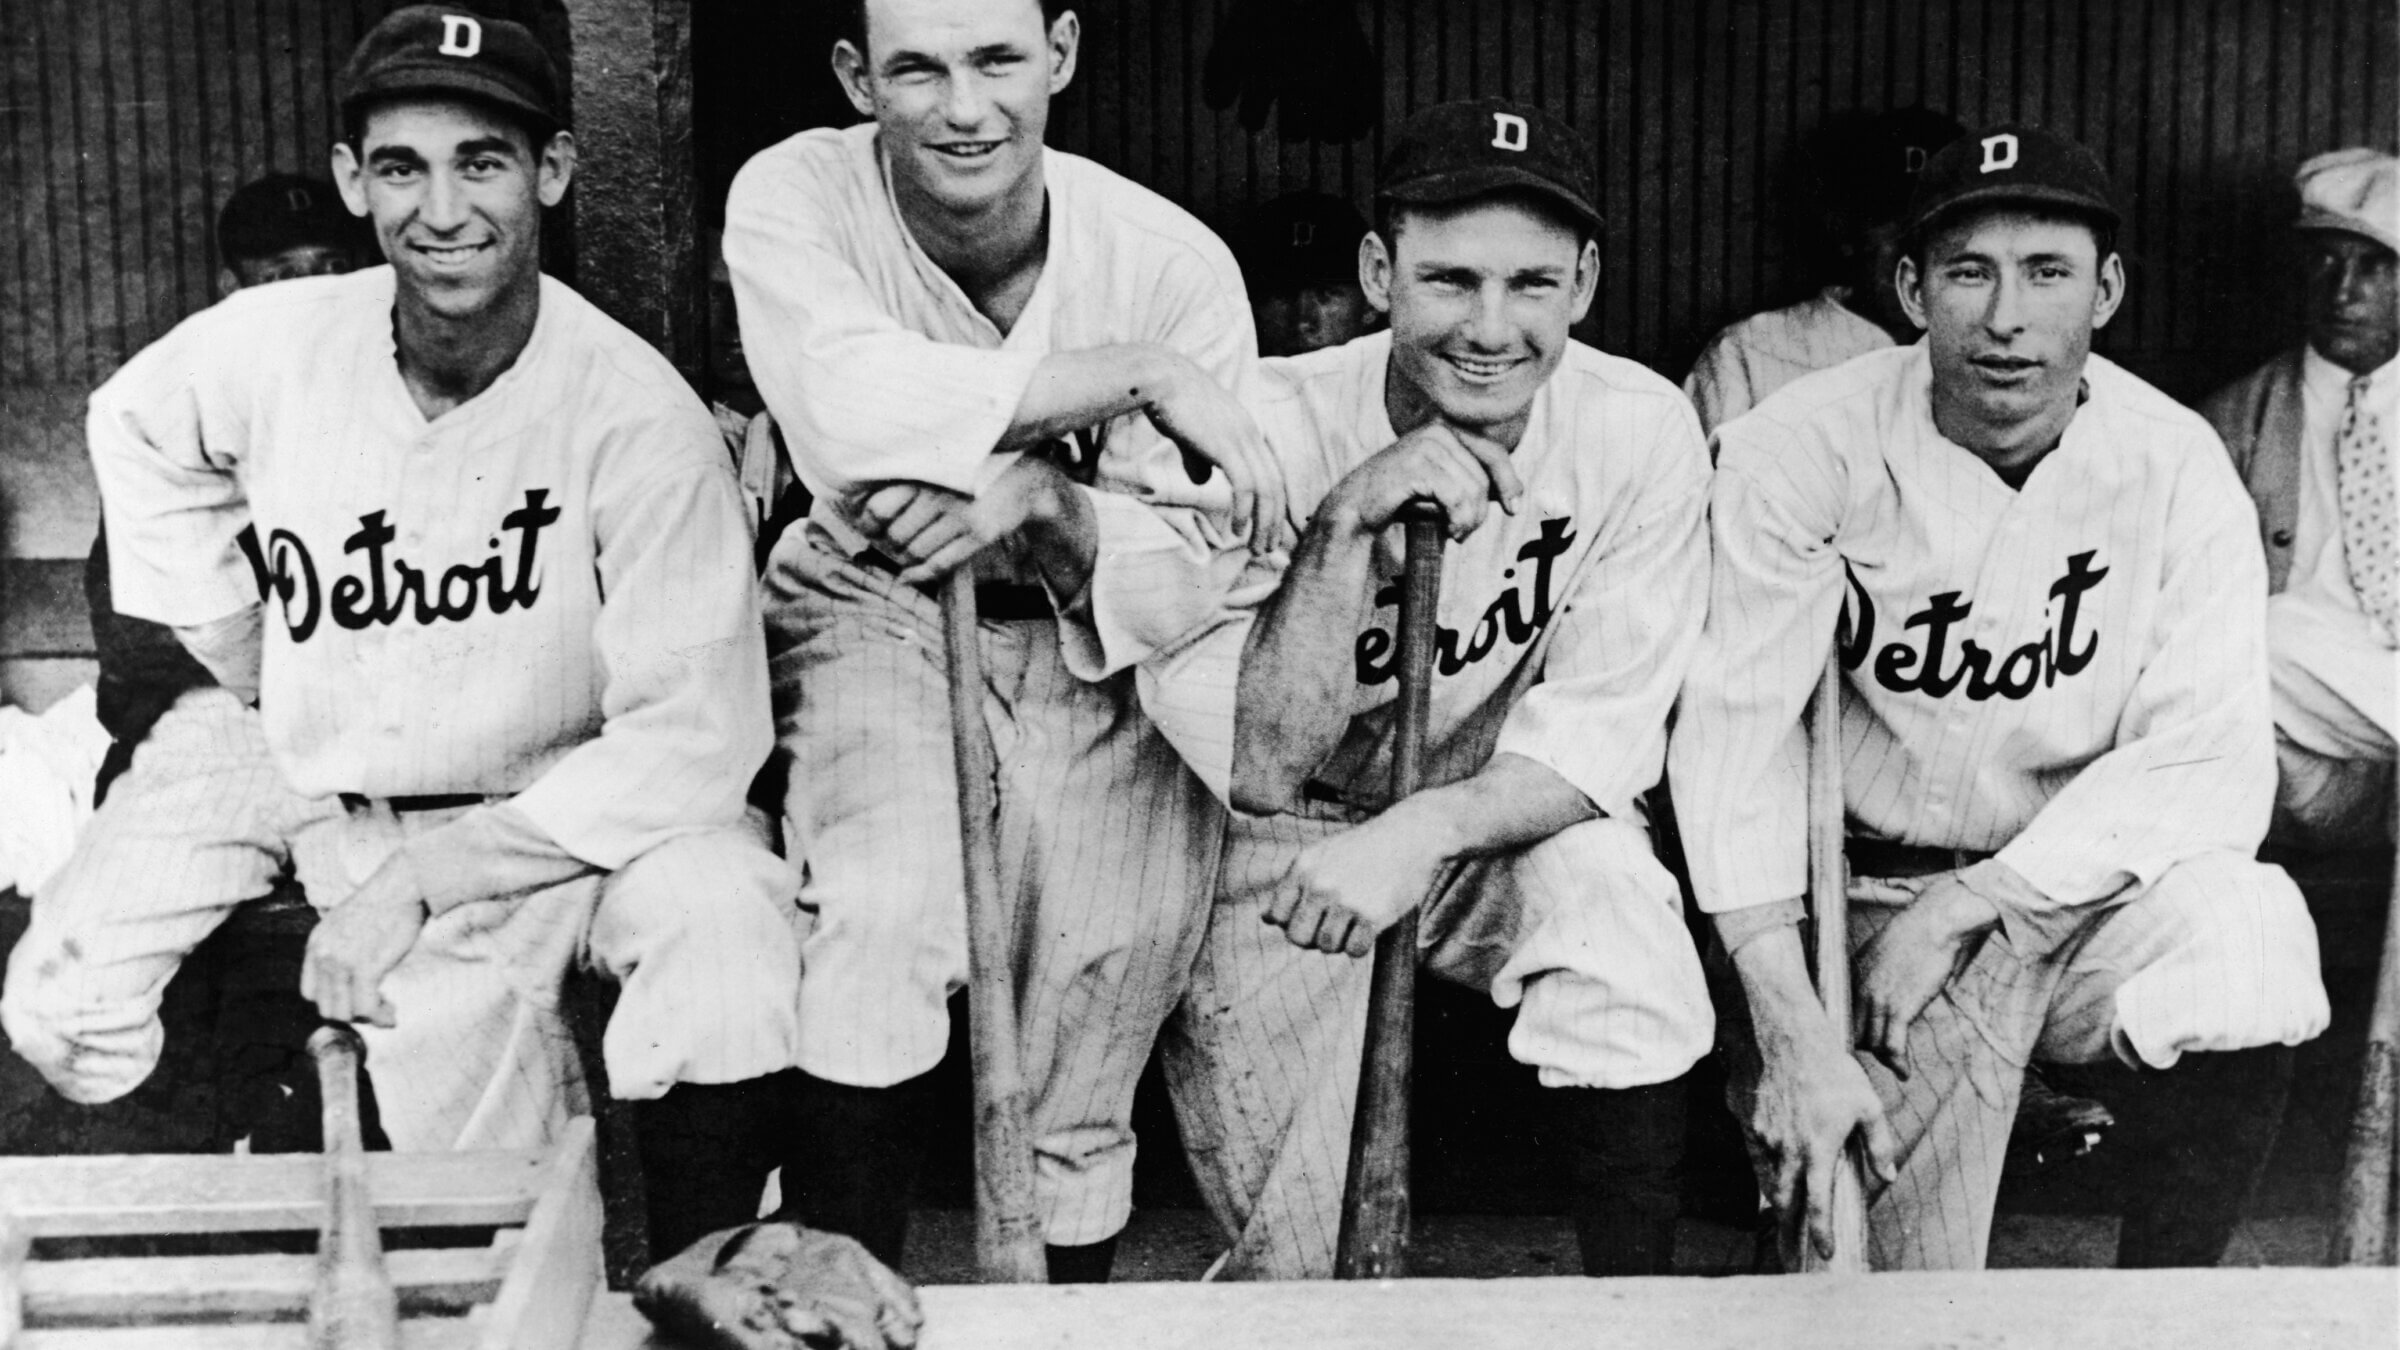 Four members of the Detroit Tigers baseball team pose in the dugout on July 5, 1932. From left, Ukrainian-born Izzy Goldstein (1908 - 1993) and Americans Harry Davis (1908 - 1997), Gee Walker (1908 - 1981), and Heinie Schuble (1906 - 1990)